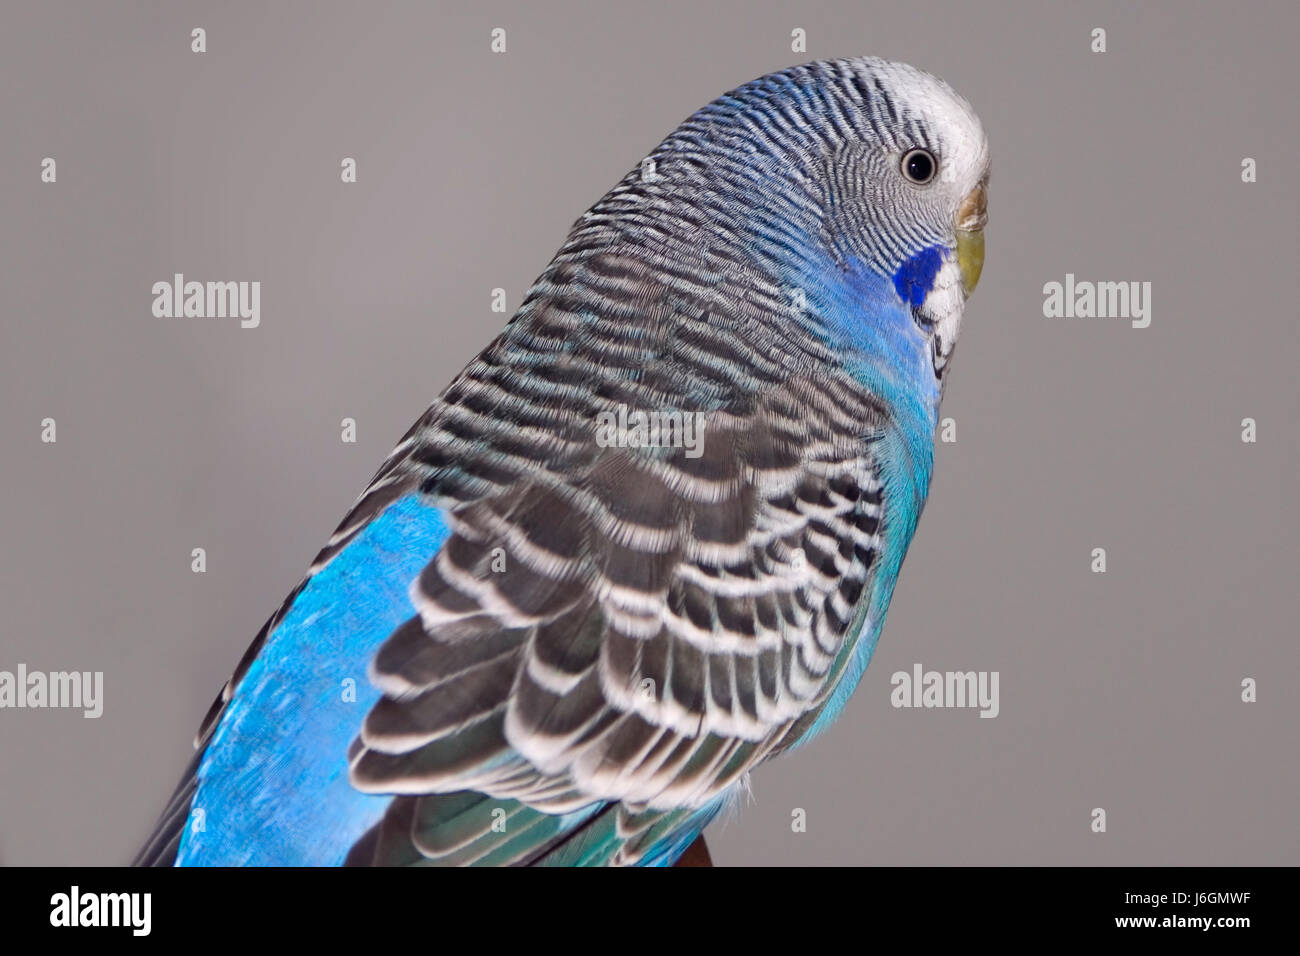 budgie-blue-and-white-bird-picture-id980004796 (736×1024)